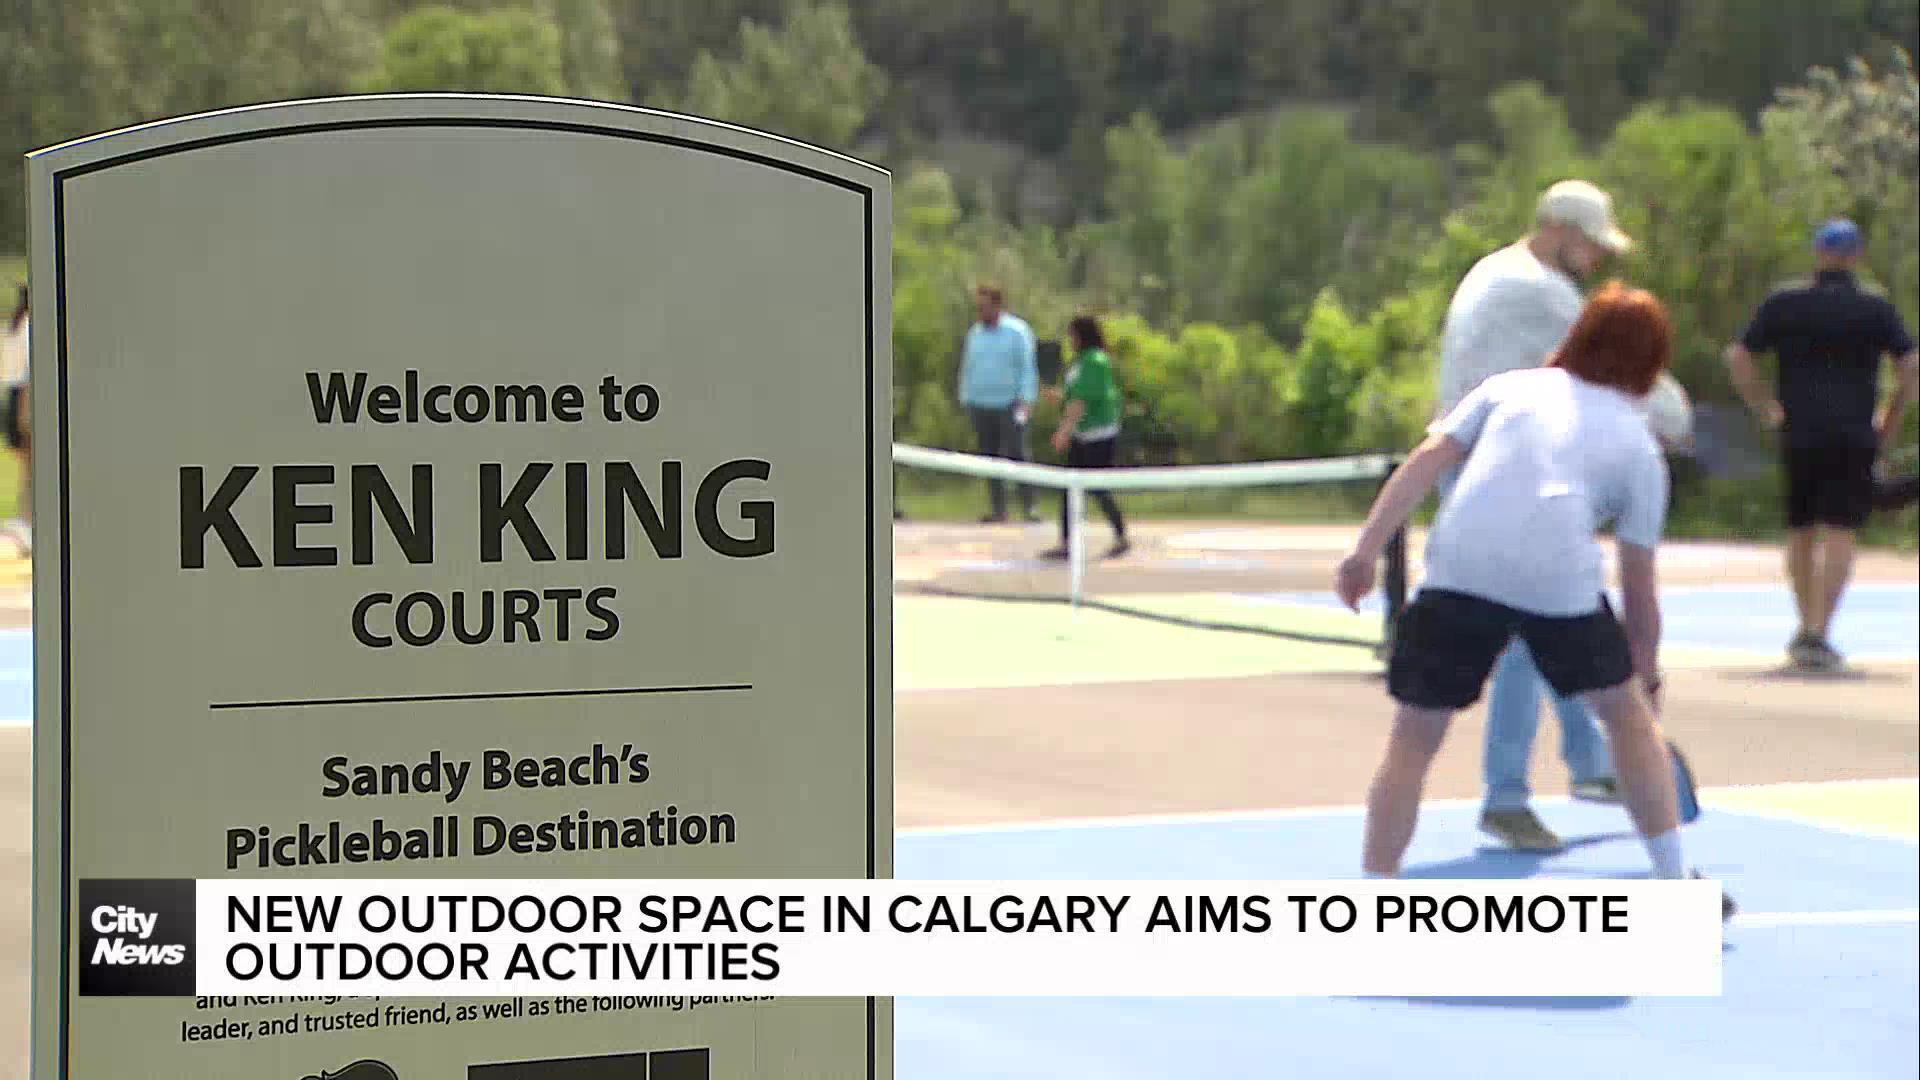 New outdoor space in Calgary aims to promote outdoor activities